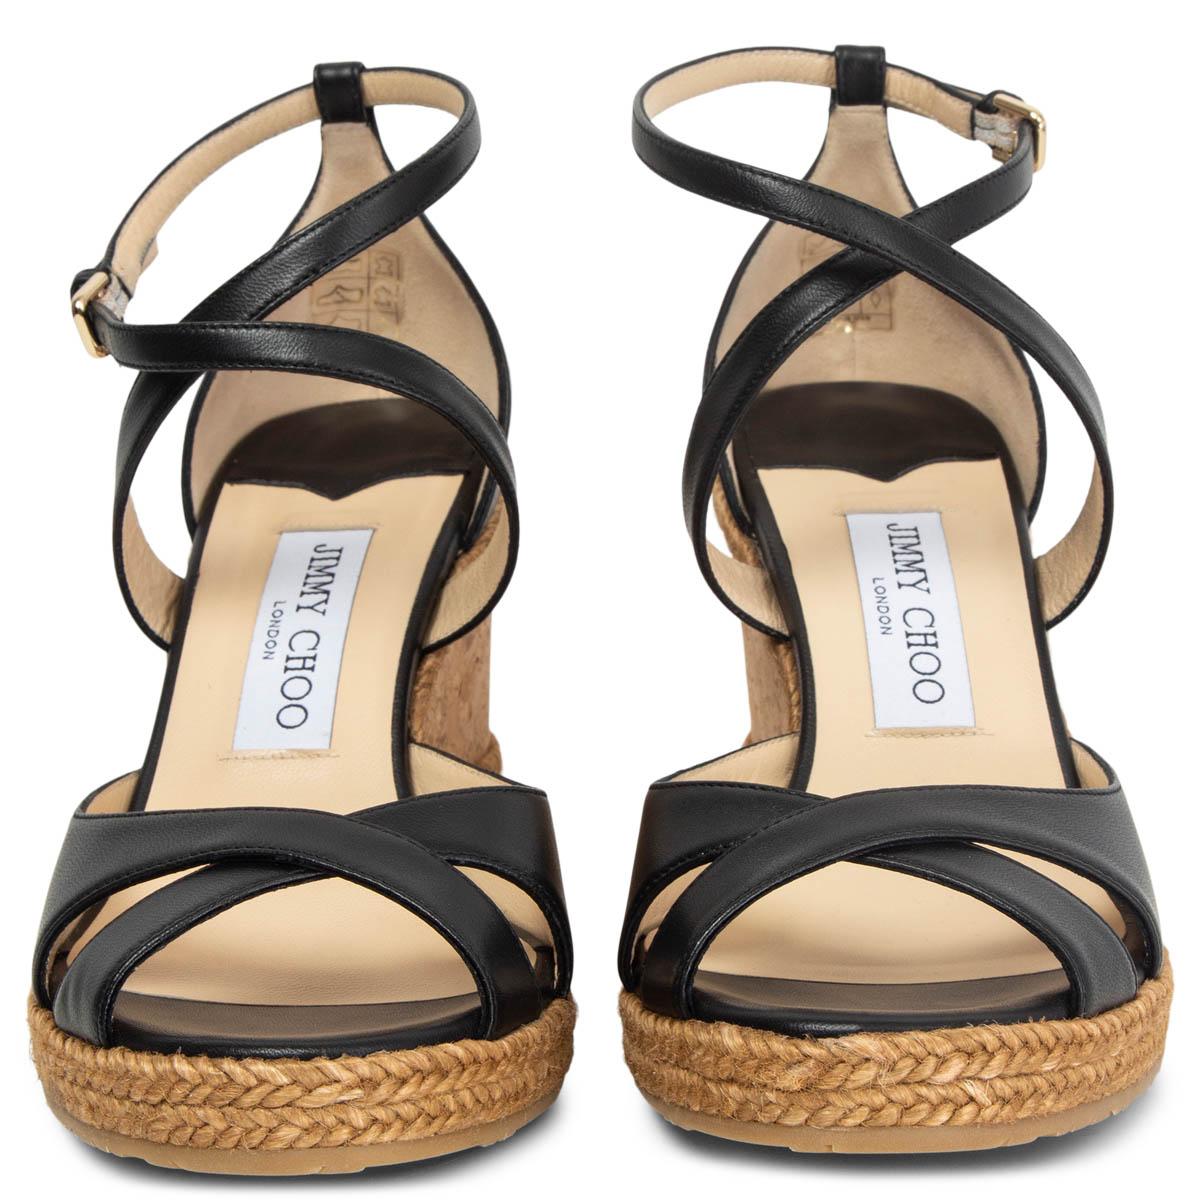 100% authentic Jimmy Choo Alanah wedge sandals in black leather with a beige cork sole. Brand new. 

Measurements
Imprinted Size	38
Shoe Size	38
Inside Sole	24.5cm (9.6in)
Width	8cm (3.1in)
Heel	8cm (3.1in)
Platform:	2cm (0.8in)

All our listings